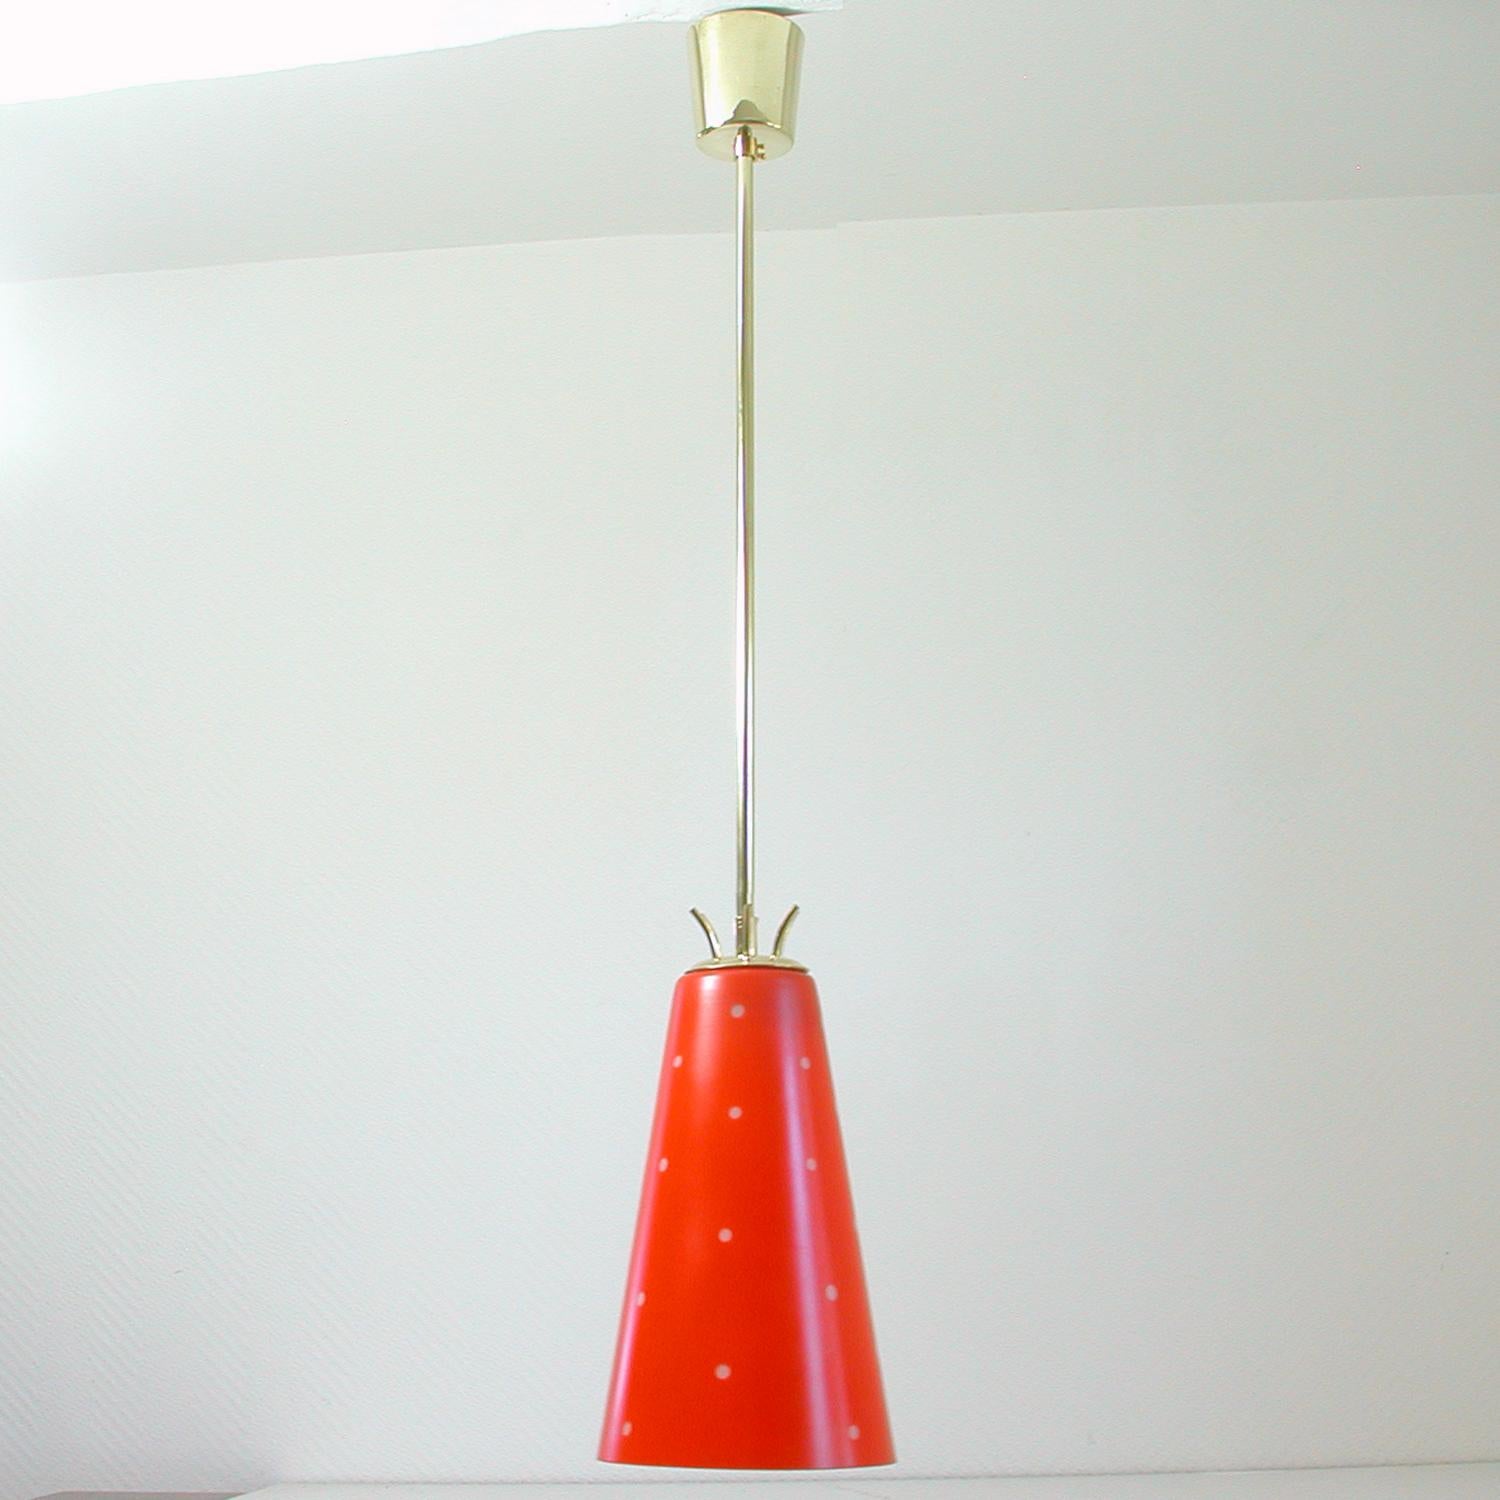 This unusual pendant was manufactured in Sweden in the 1950s. It is made of brass and has got a red and white (dotted) opal glass lampshade. I would call the red color tomato.

Condition is very good and the lamp is in full working order